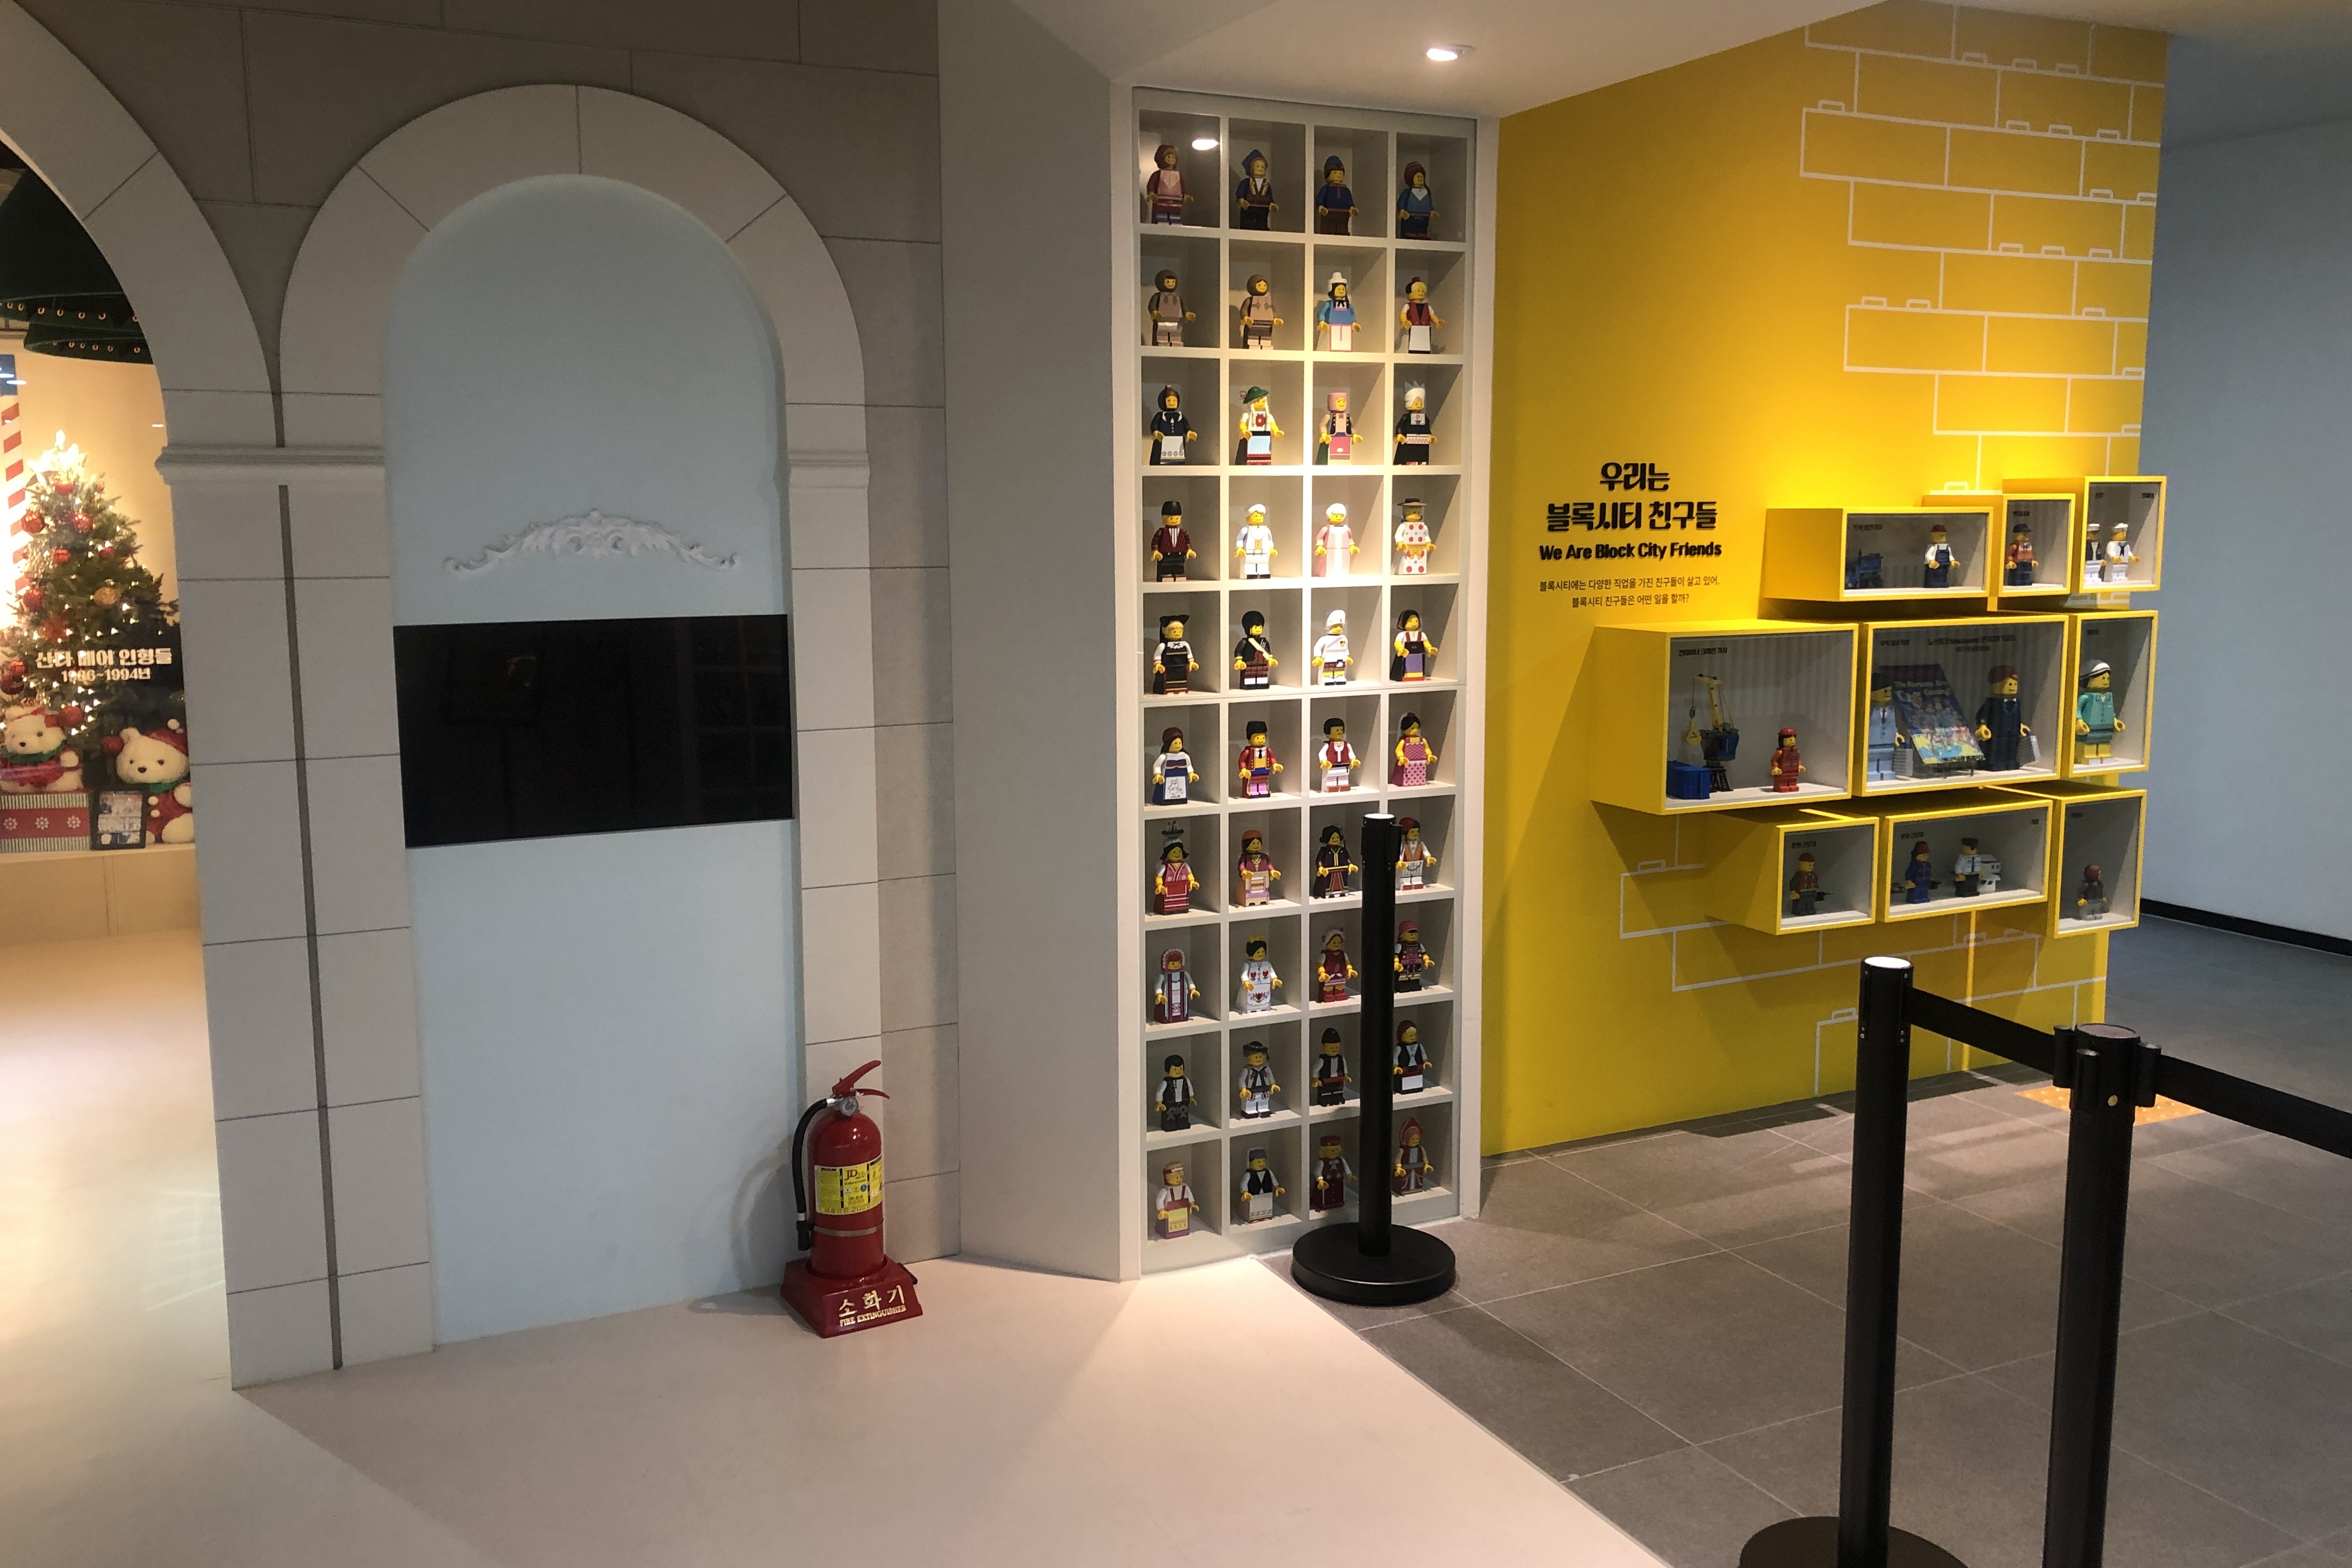 Block city2 : Interior view of the entrance to Block City where displays block toys